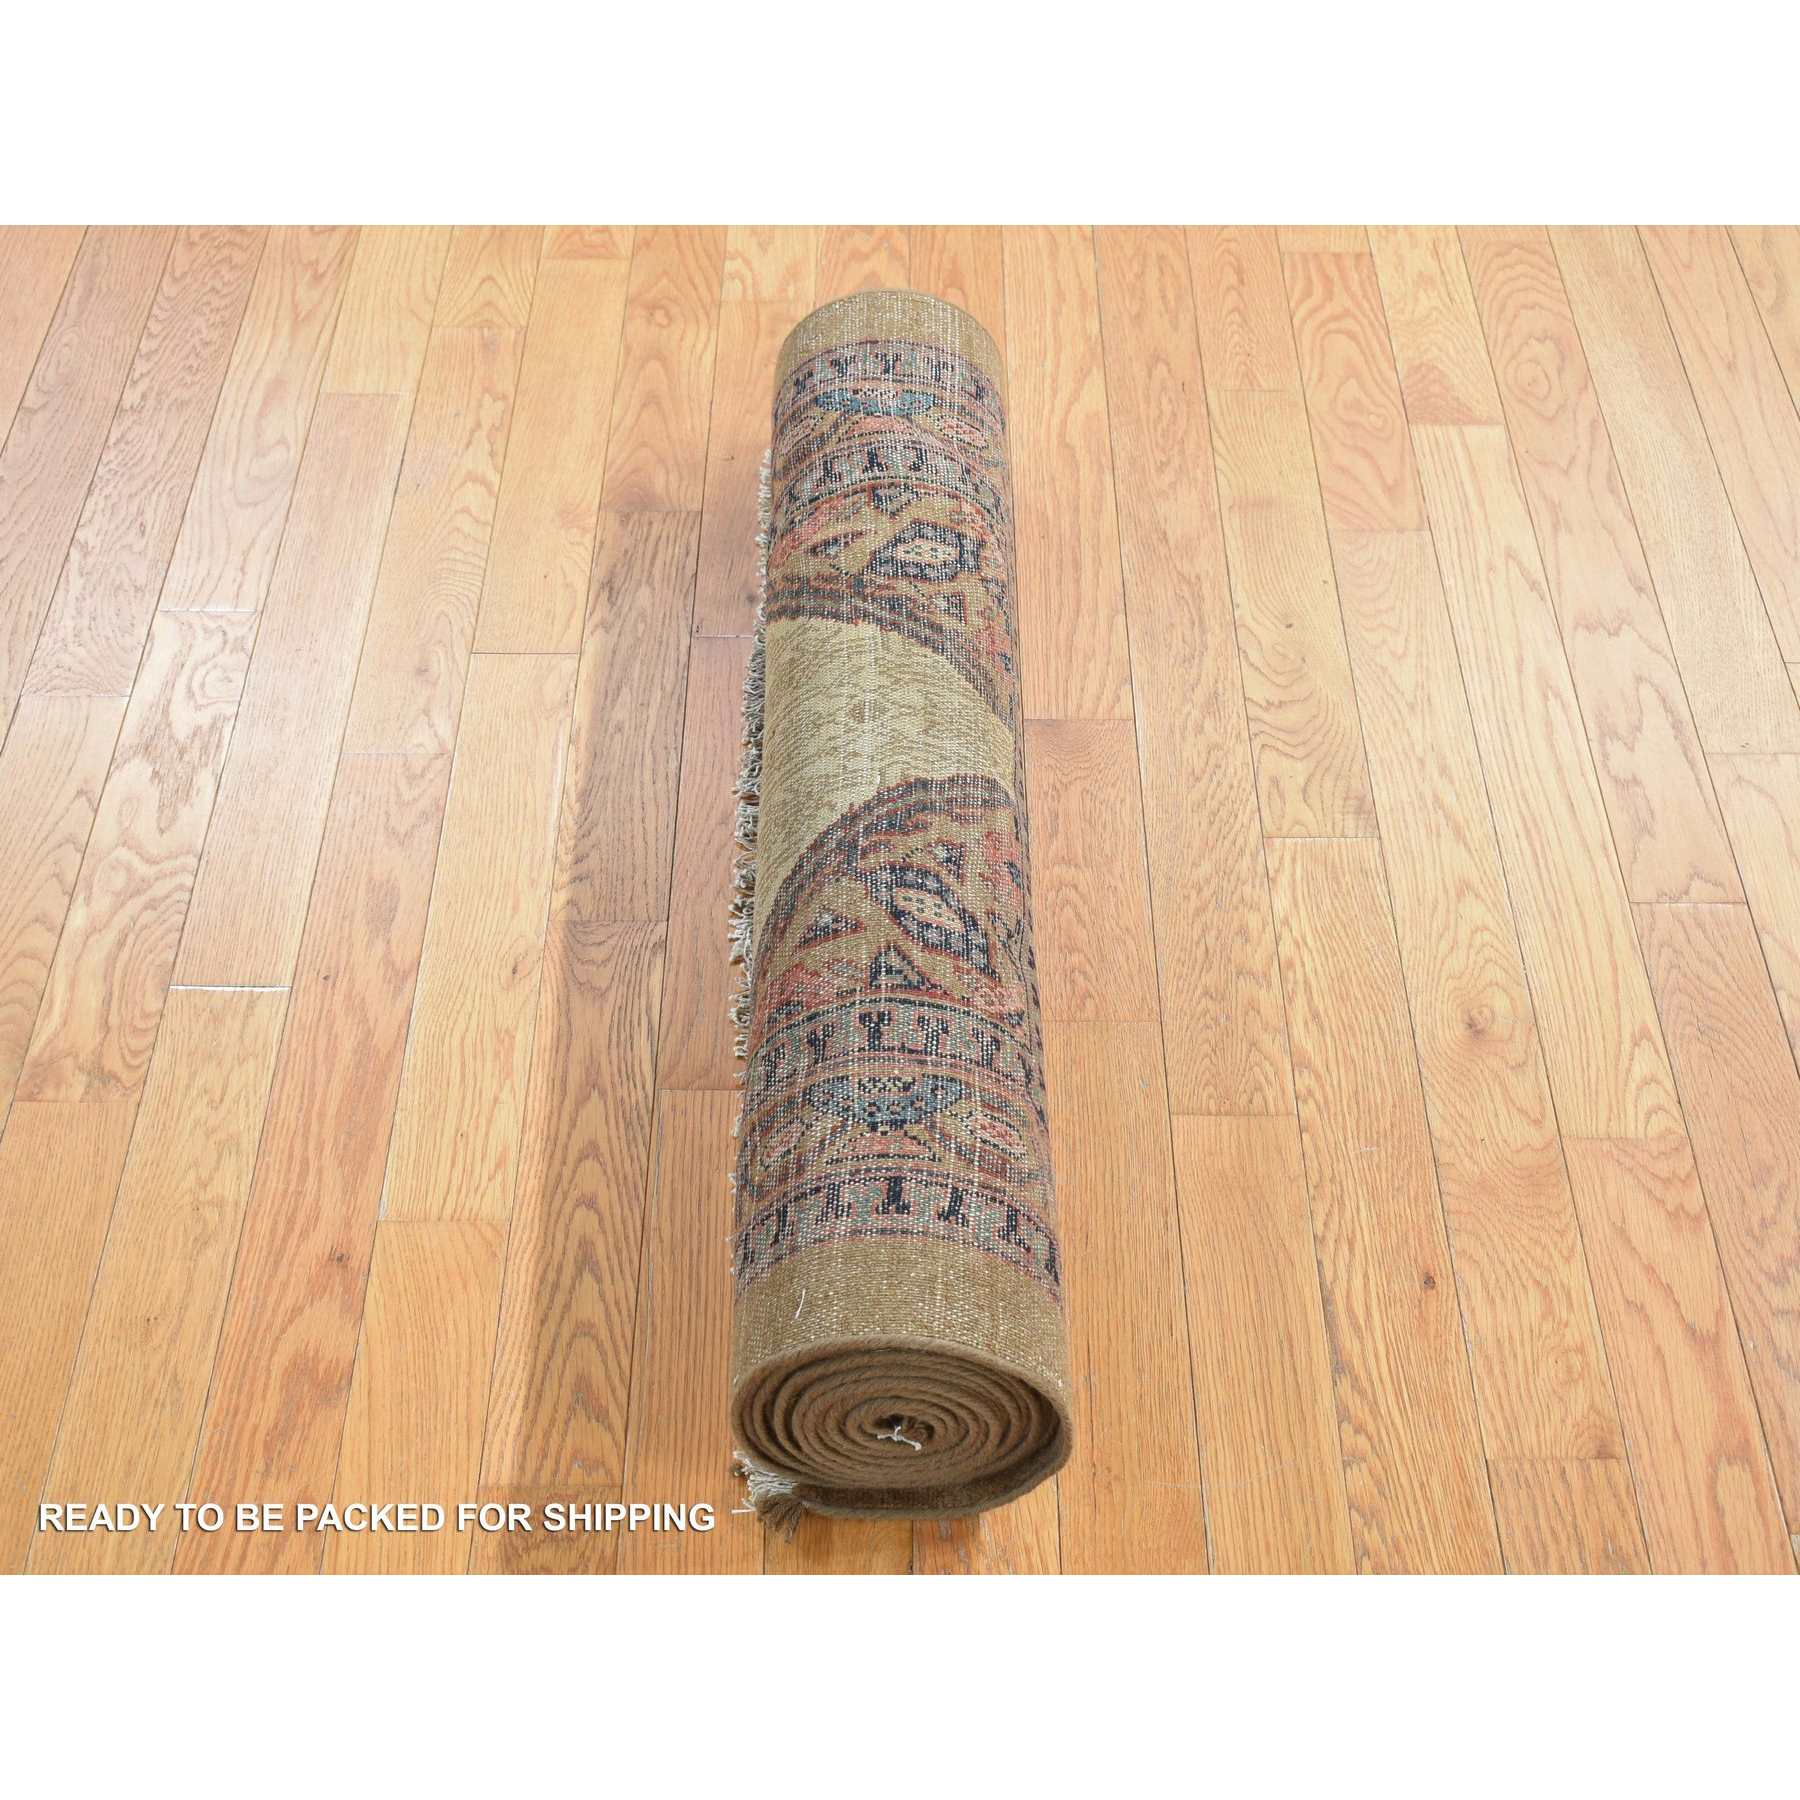 Antique-Hand-Knotted-Rug-403645